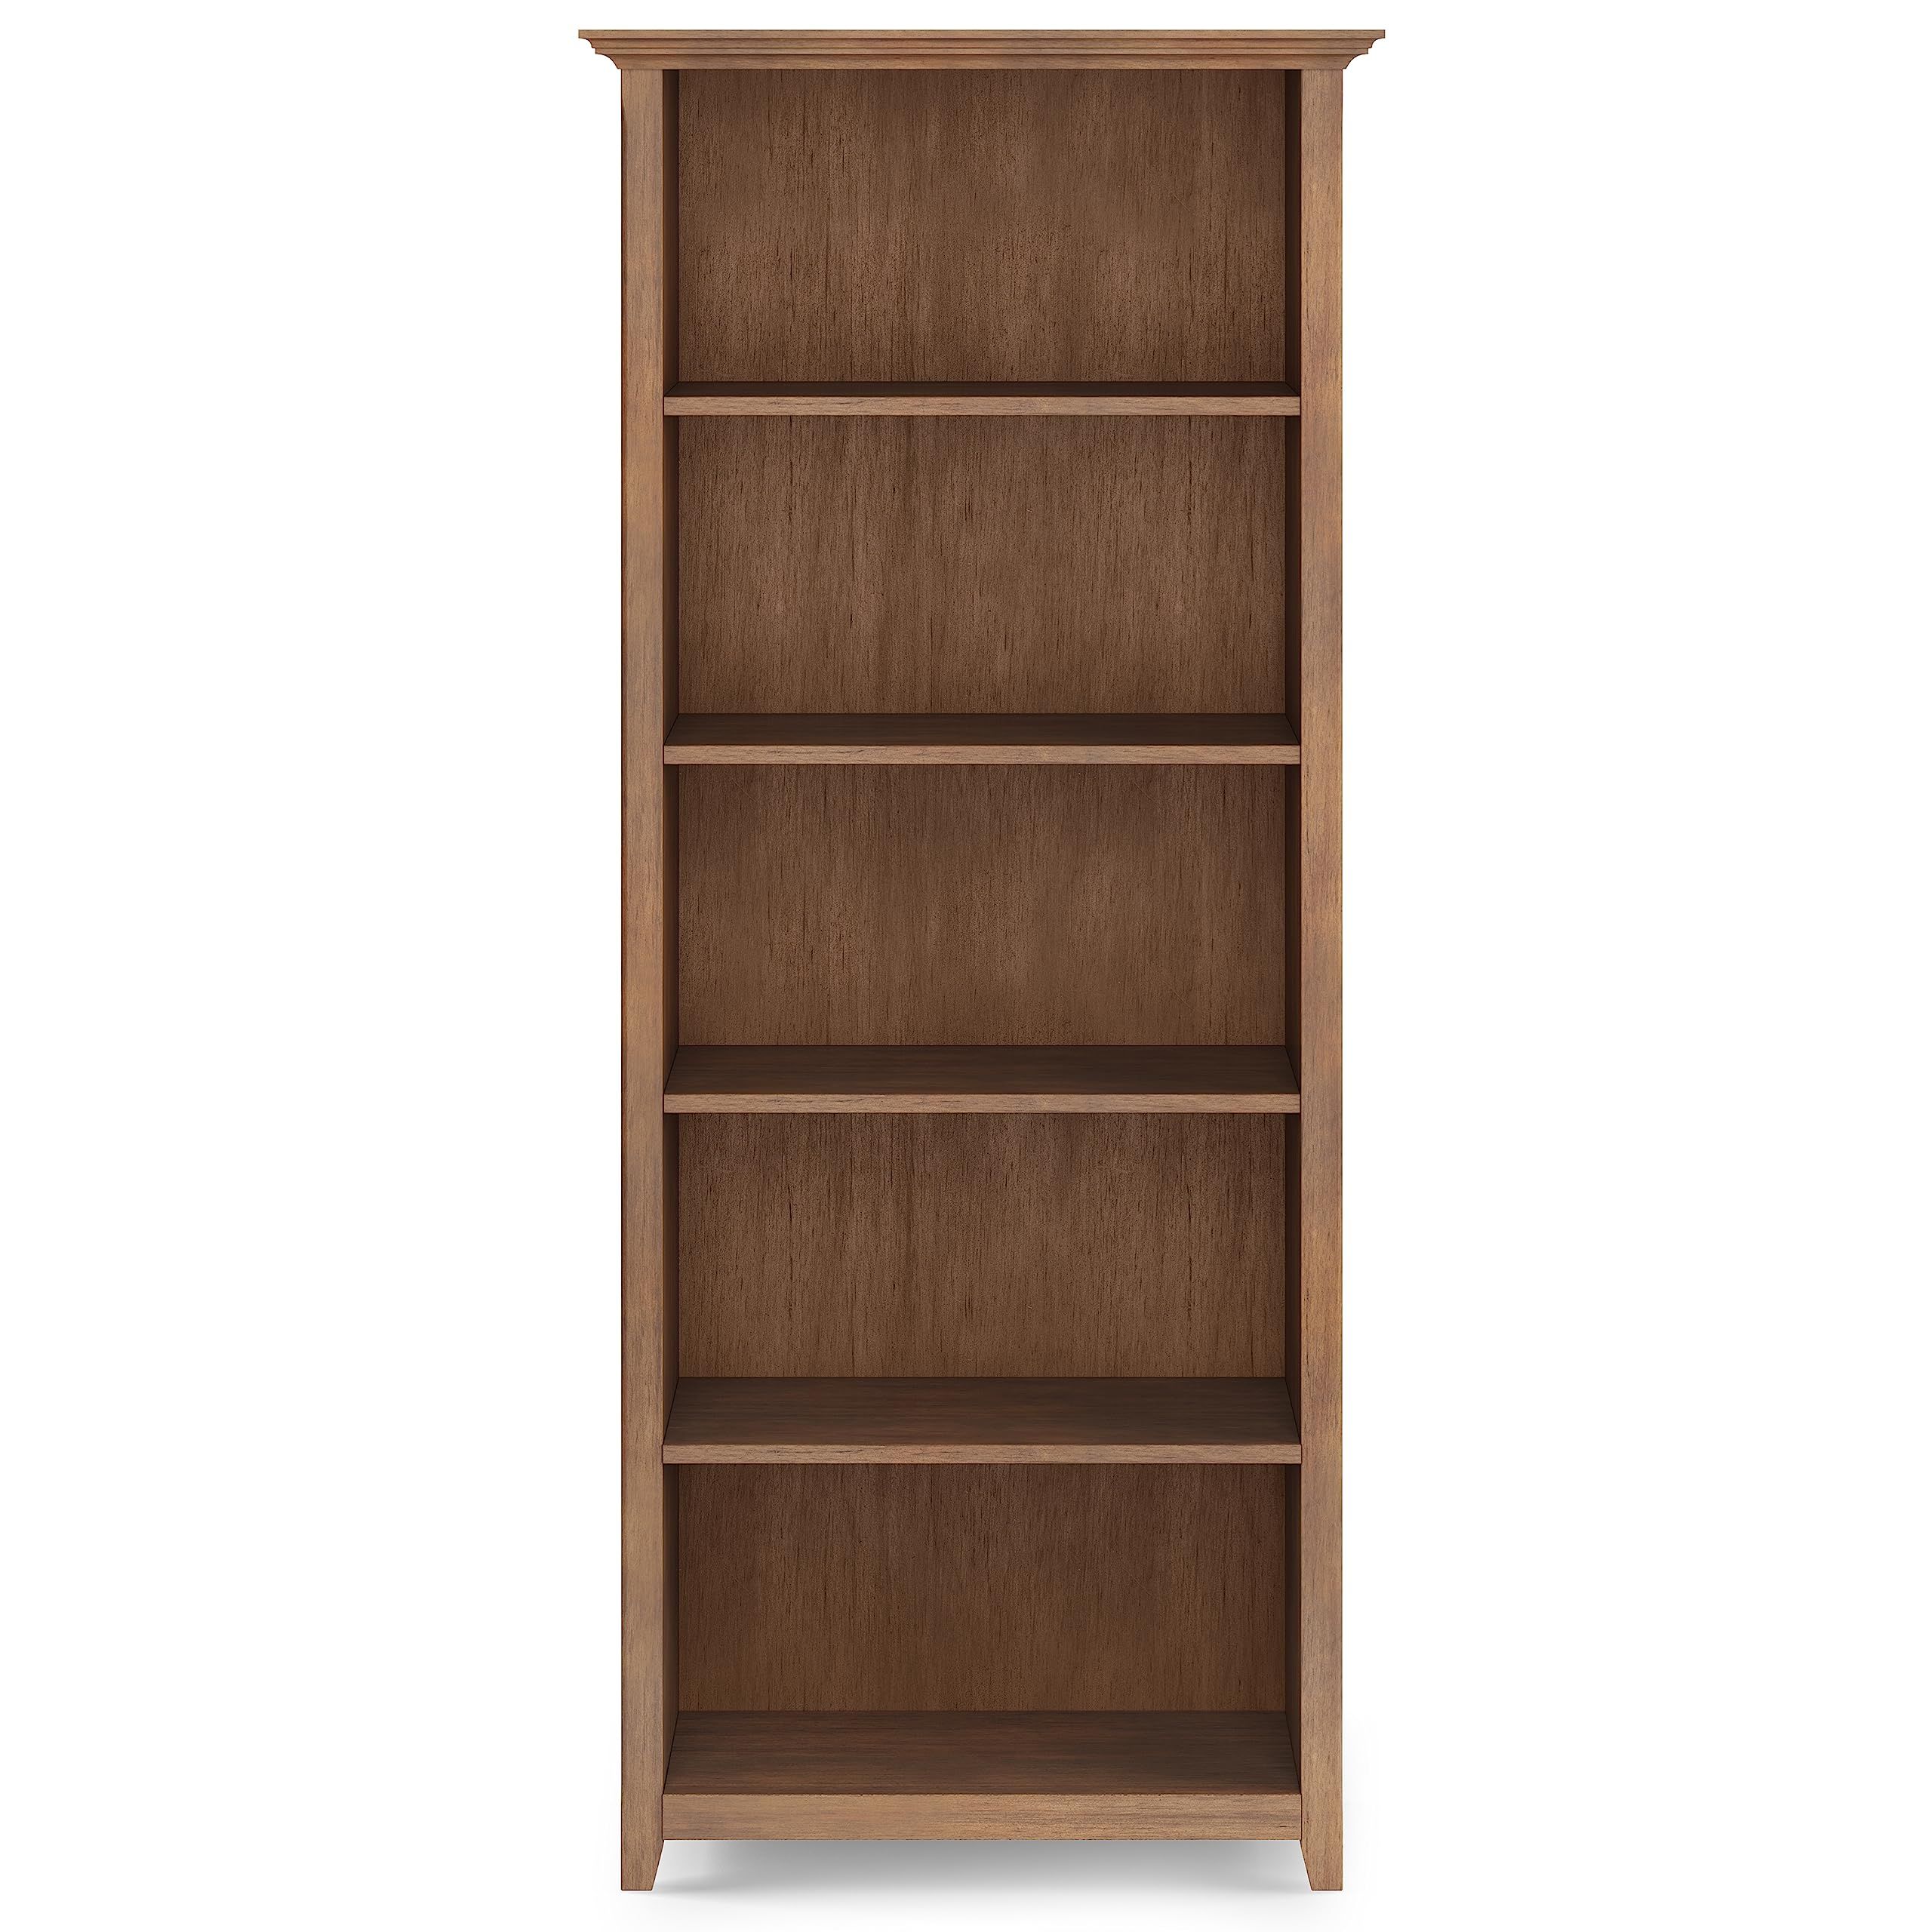 SIMPLIHOME Amherst Solid Wood 30 Inch Wide Transitional 5 Shelf Bookcase in Rustic Natural Aged Brown, for The Living Room, Study Room and Office | Amazon (US)